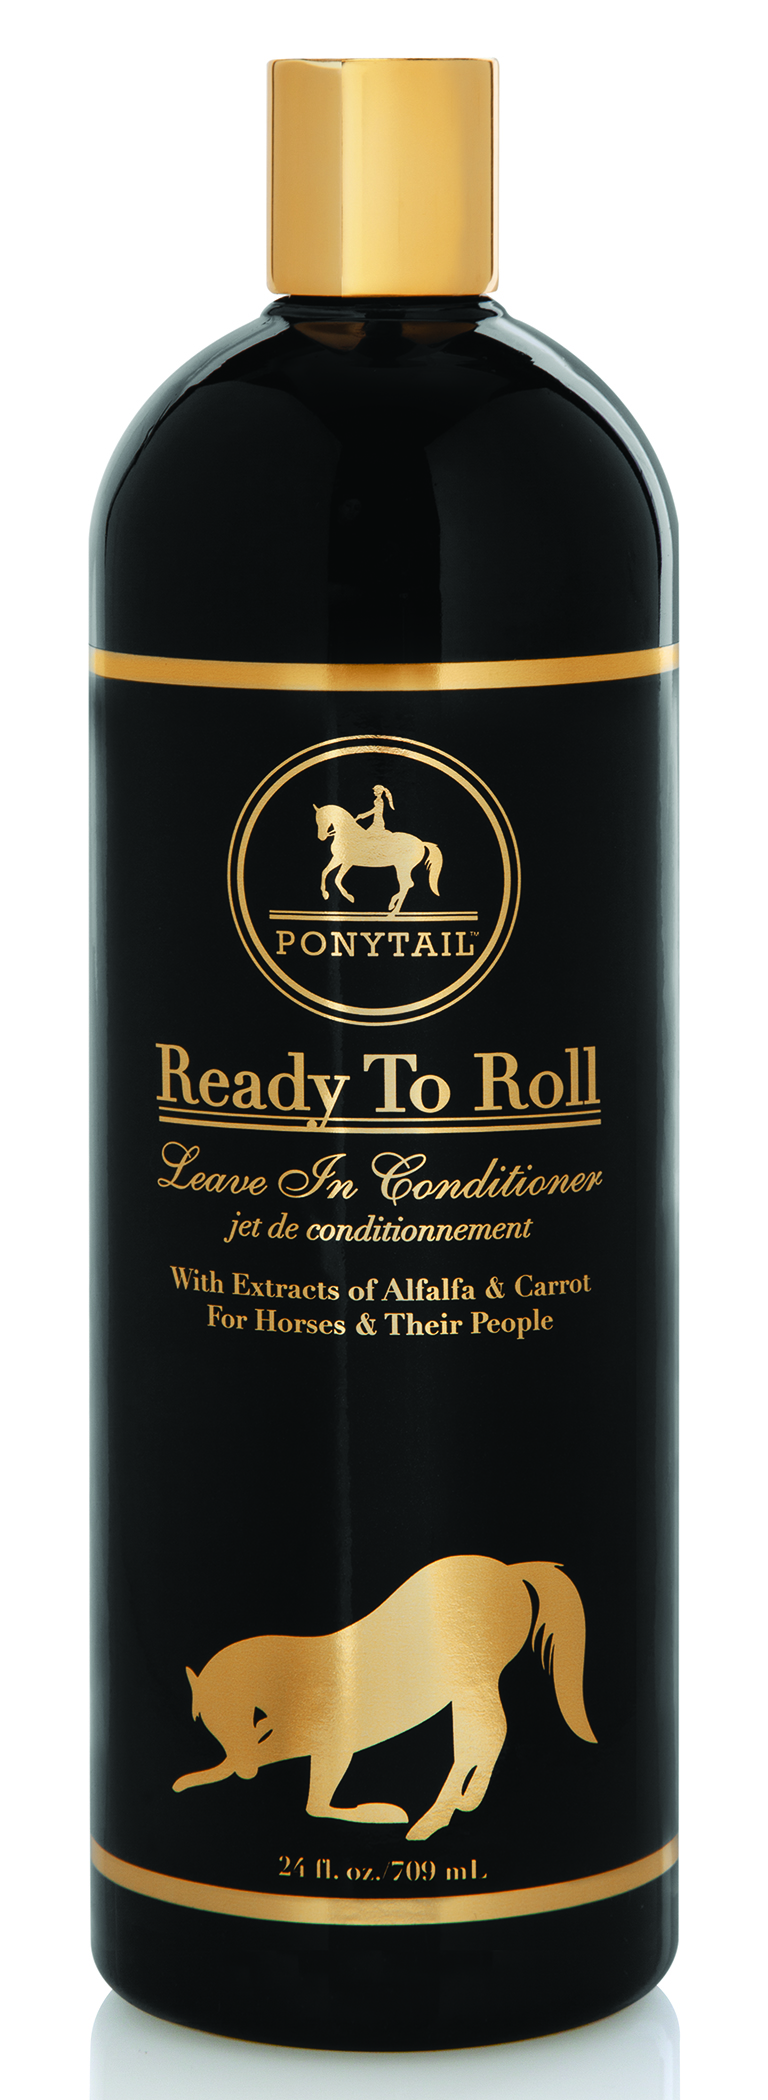 READY TO ROLL LEAVE IN CONDITIONER FOR HORSES